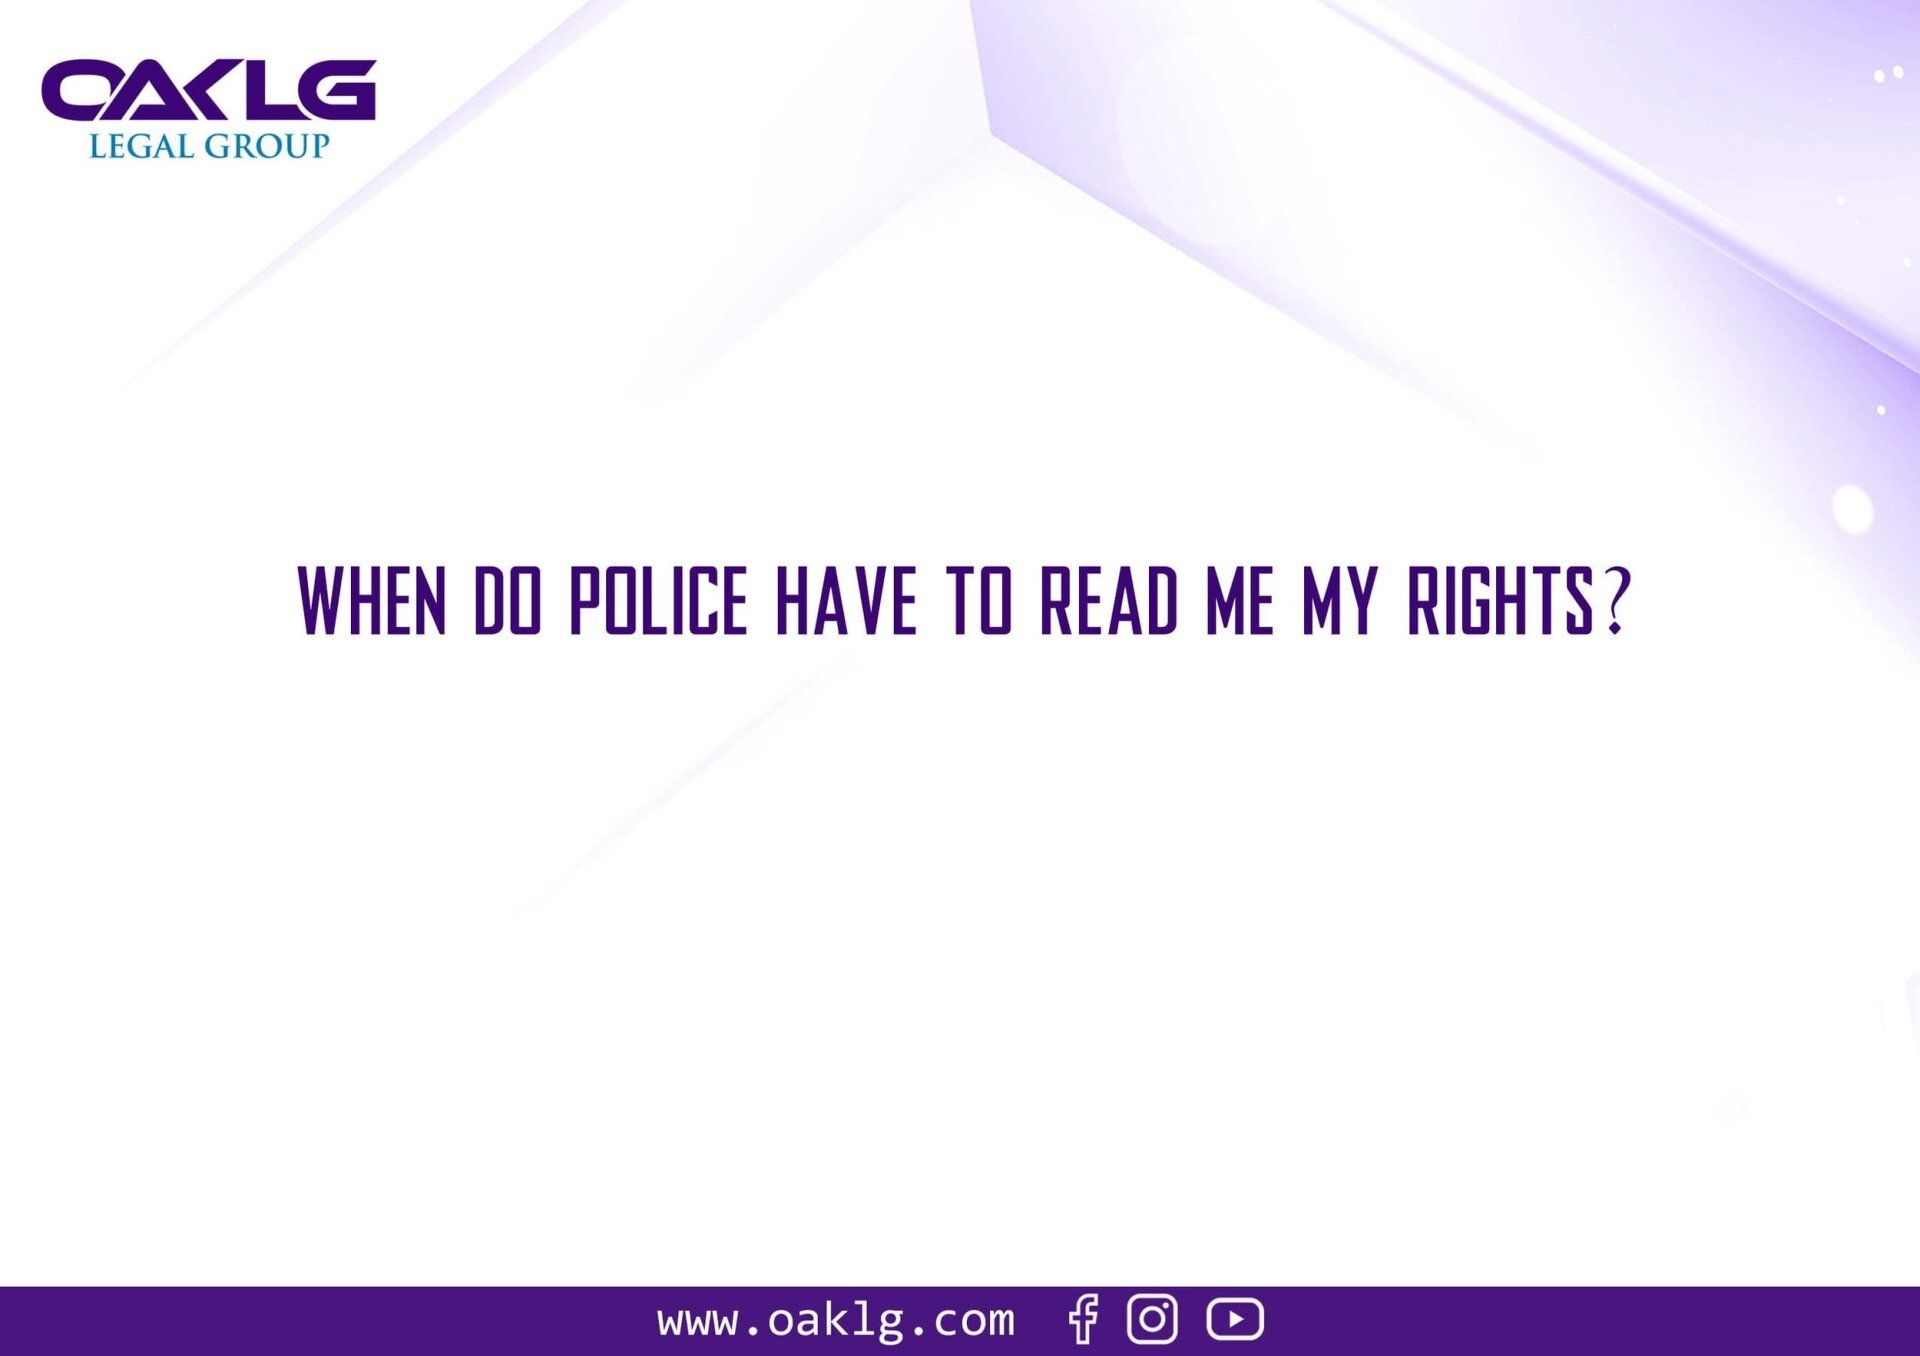 When Do Police Have to Read Me My Rights?